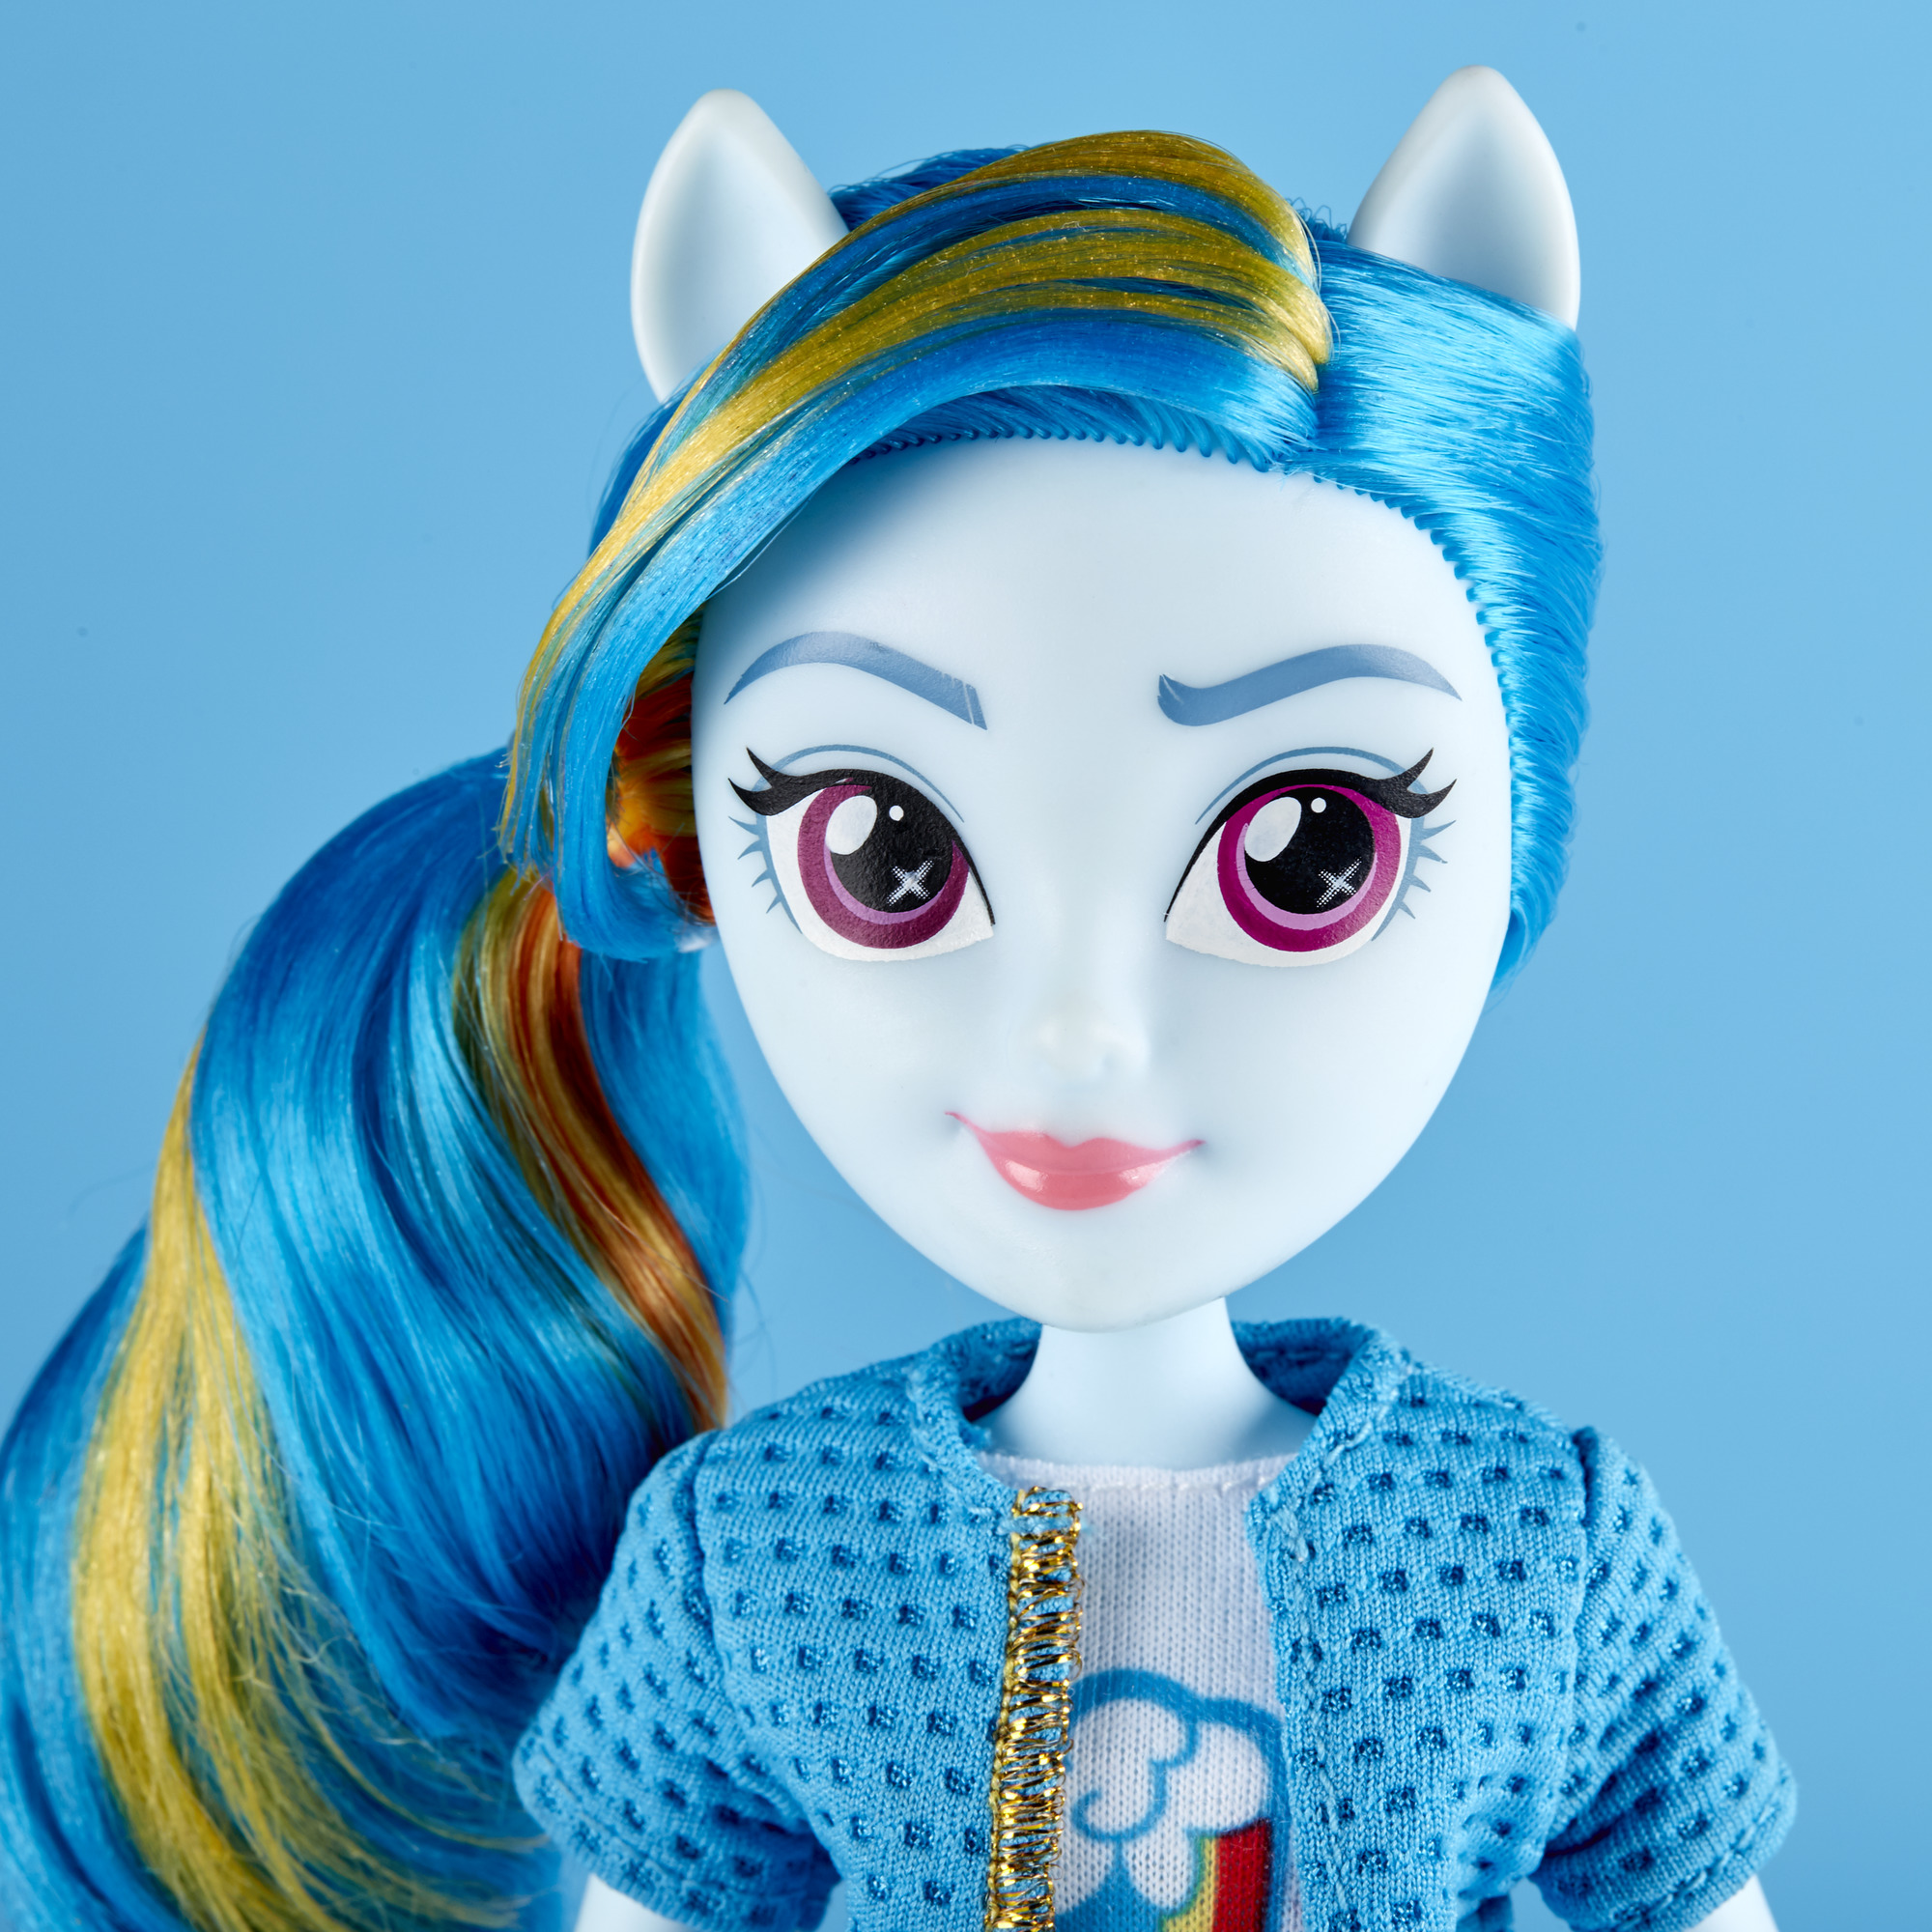 My Little Pony Equestria Girls Rainbow Dash Classic Style Doll - image 4 of 11